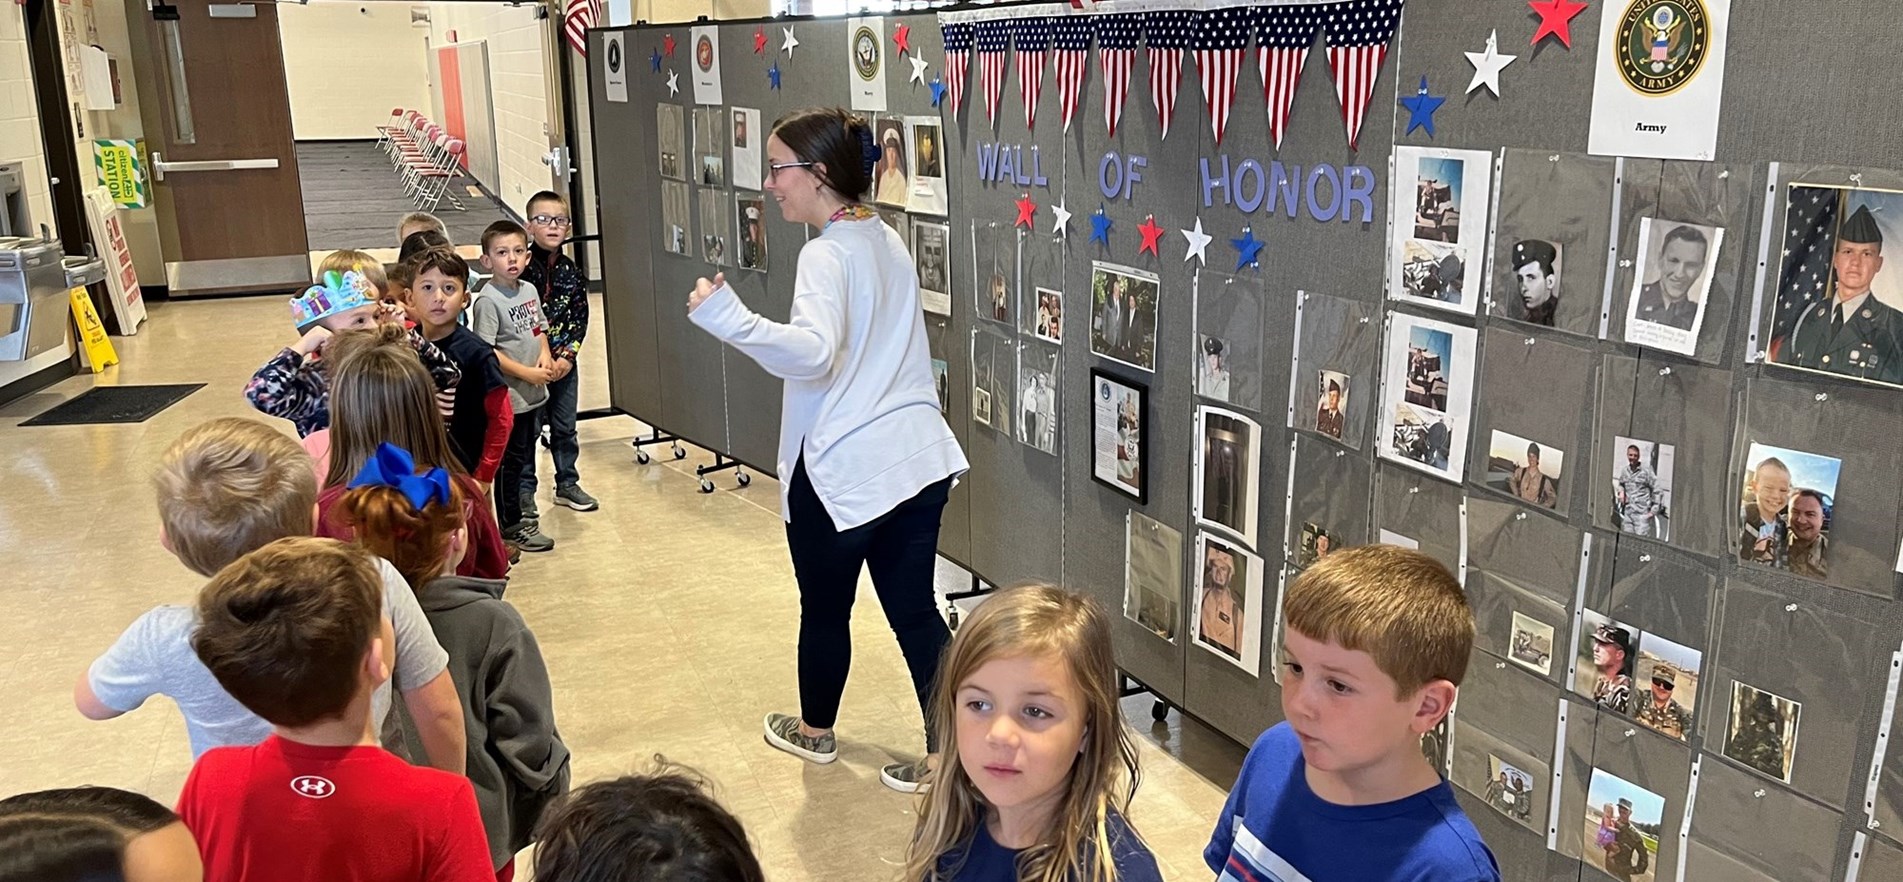 Teacher and students survey Wall of Honor featuring military family veterans photos